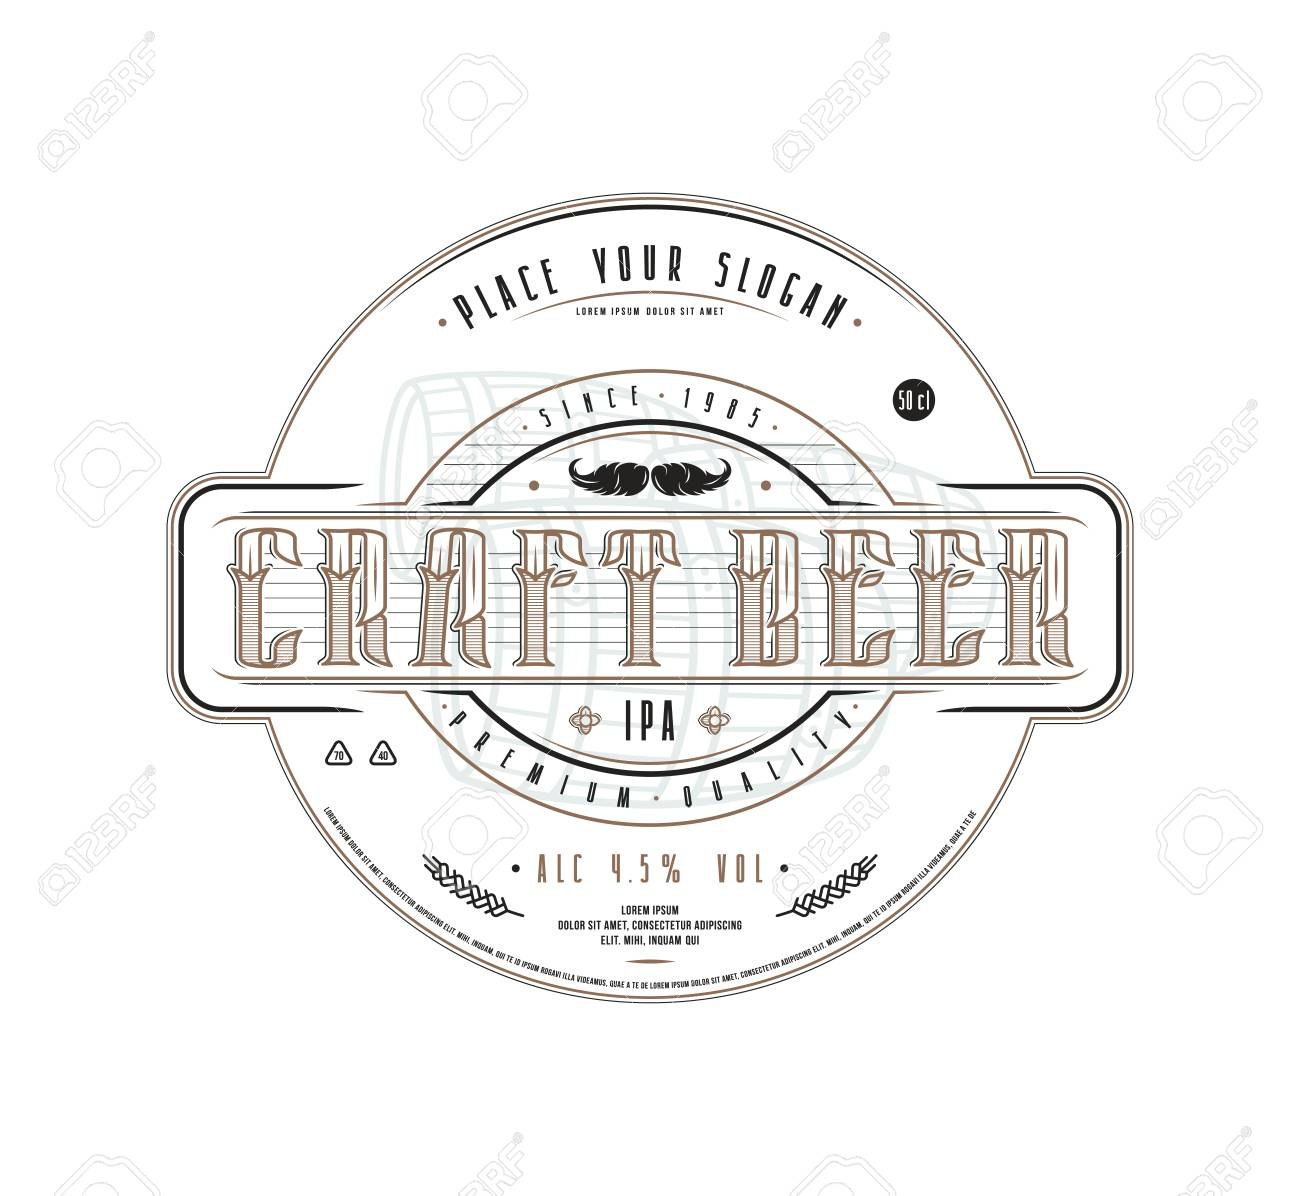 Craft Beer Label Template In Vintage Style Label With White inside Craft Label Templates